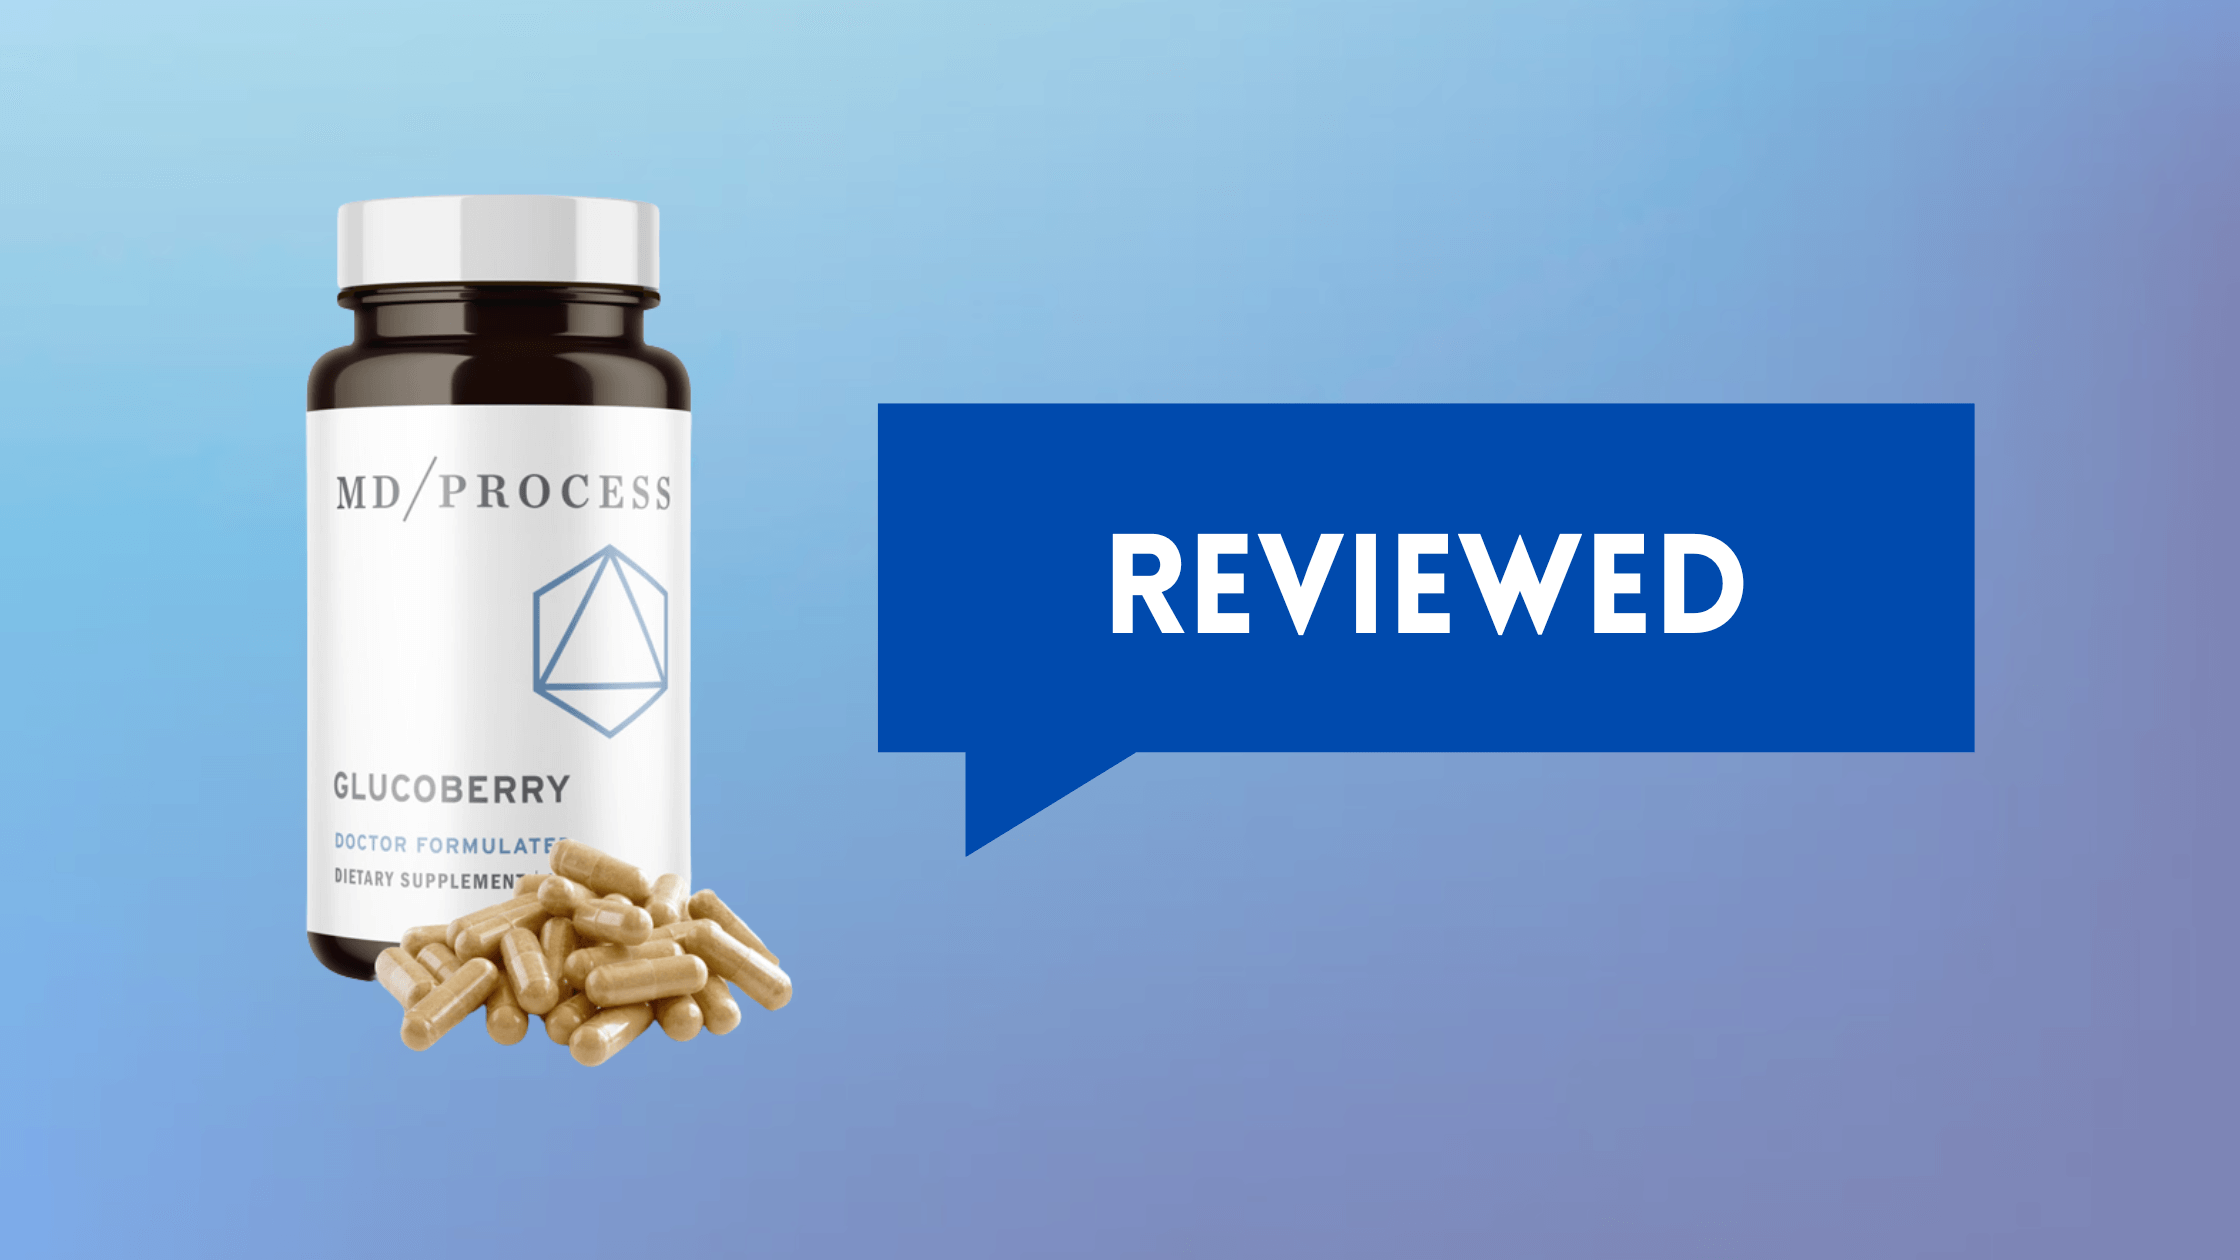 Glucoberry Review